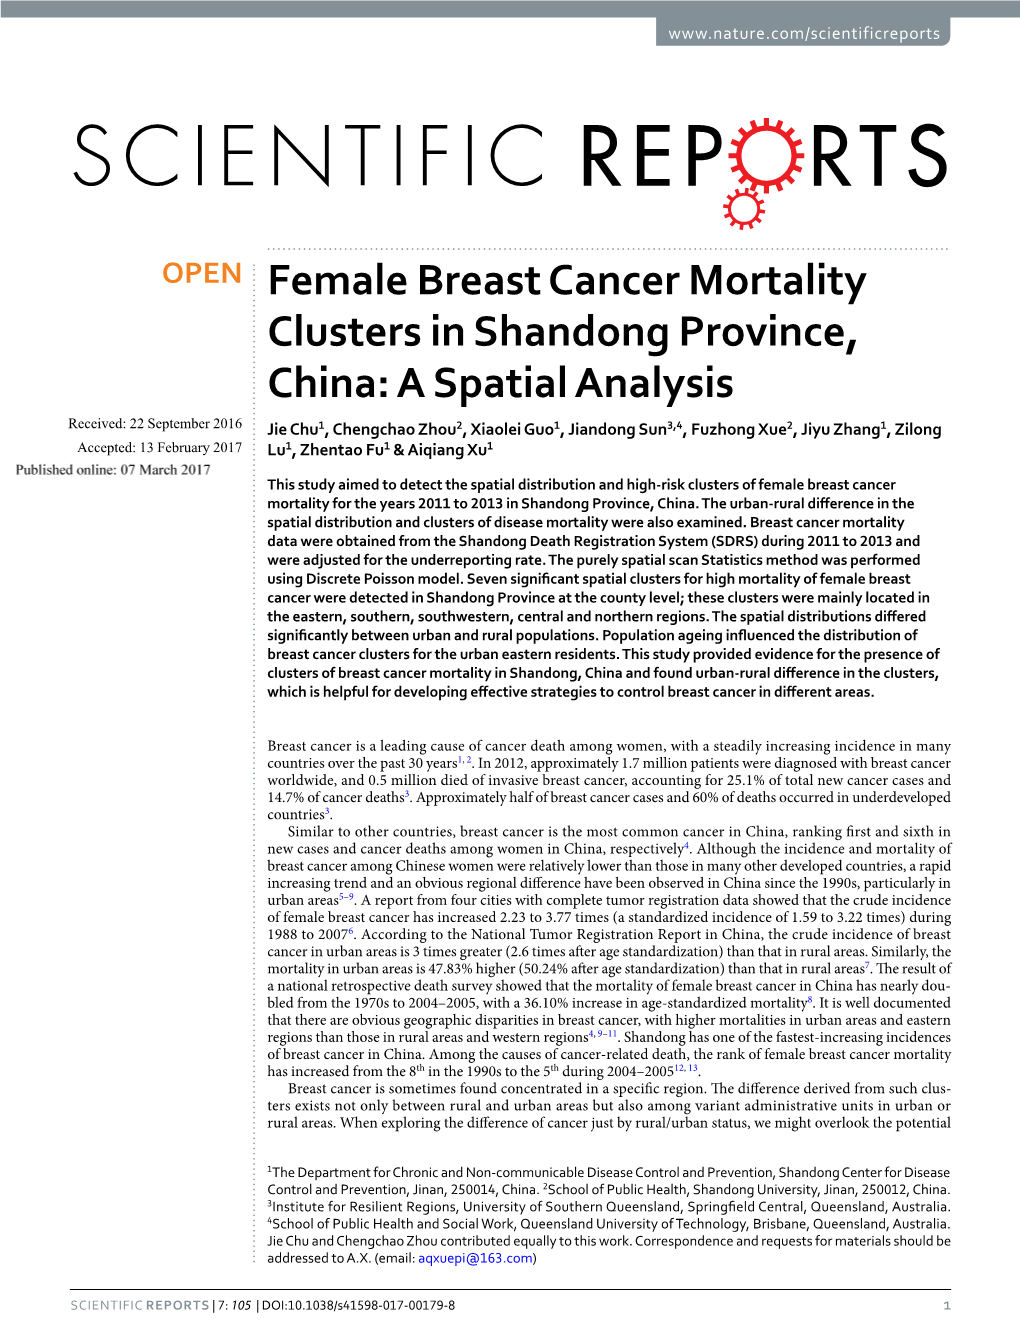 Female Breast Cancer Mortality Clusters In